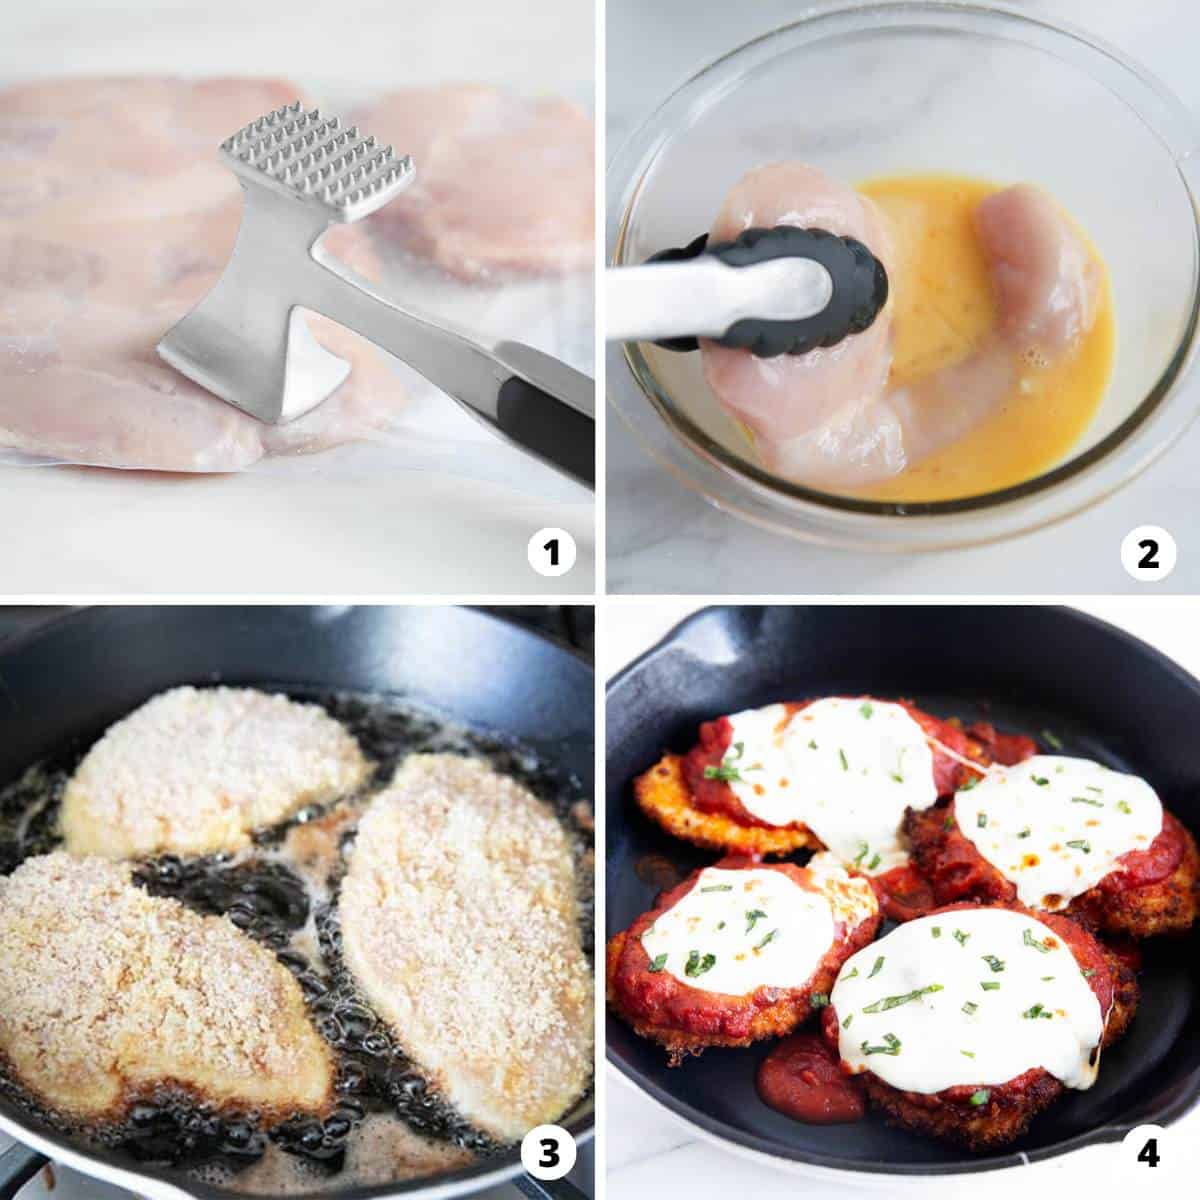 The process of making chicken parmesan dinner. 